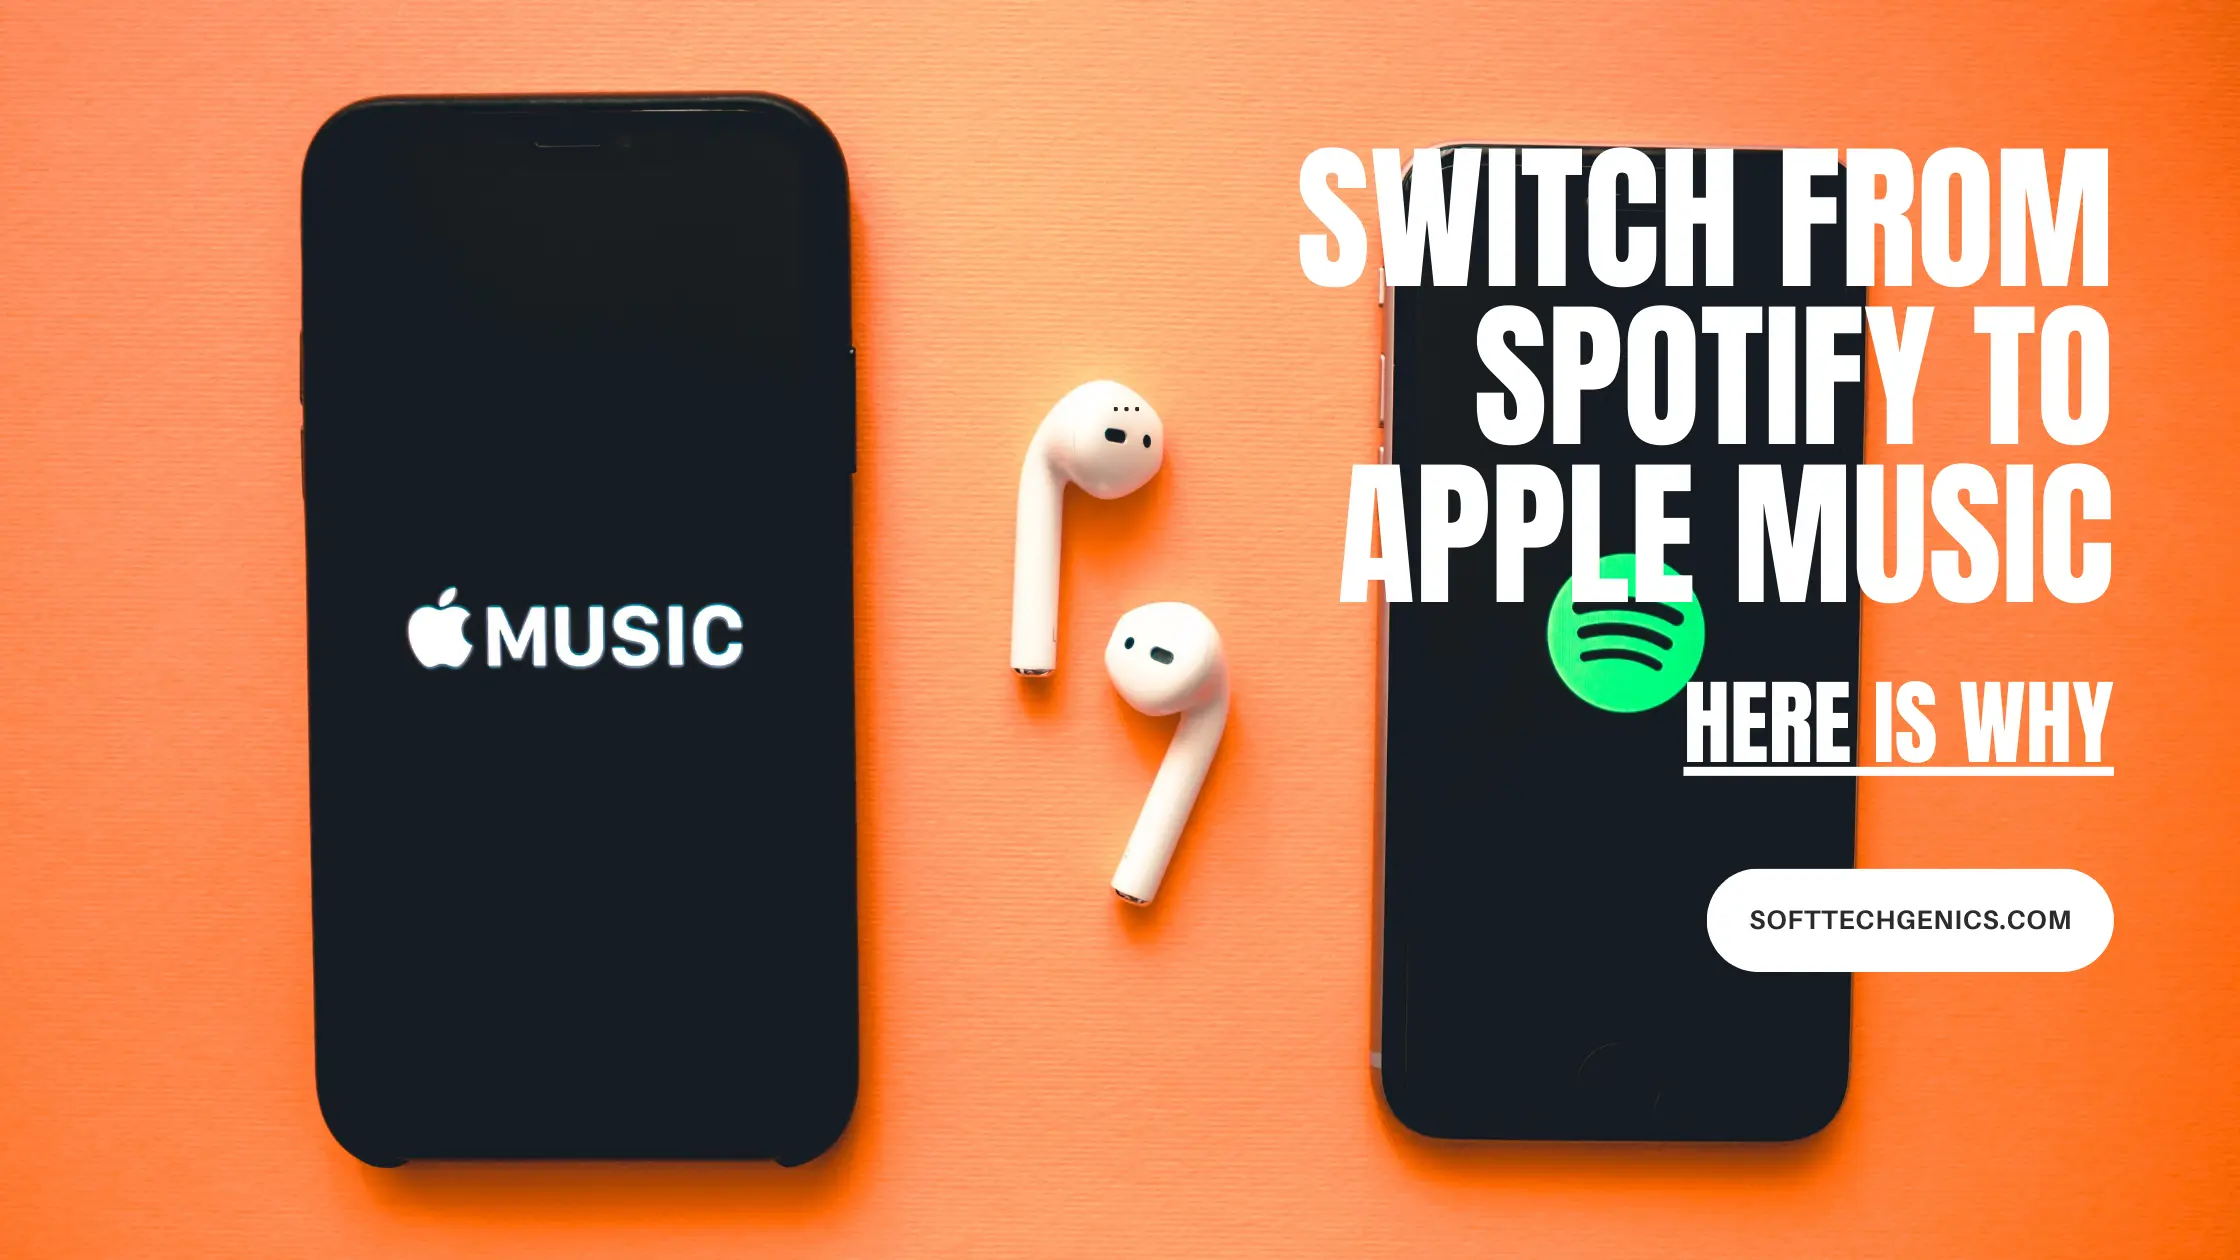 Should I Switch From Spotify To Apple Music? (Ultimate Comparison)